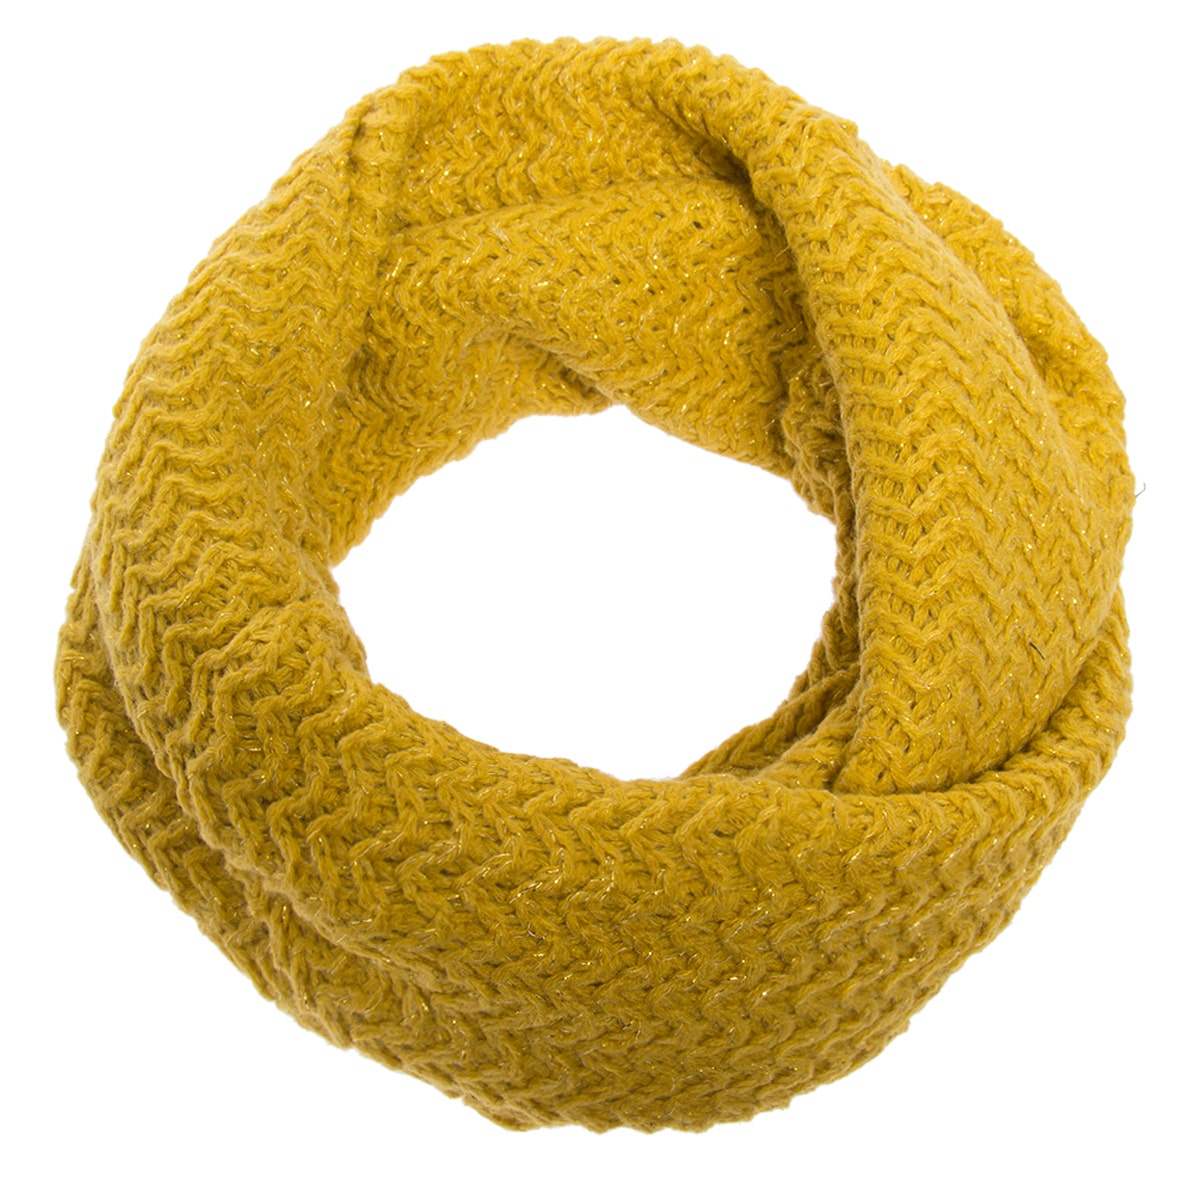 Loop Infinity Scarf With Metallic Royal The Standard by Knit